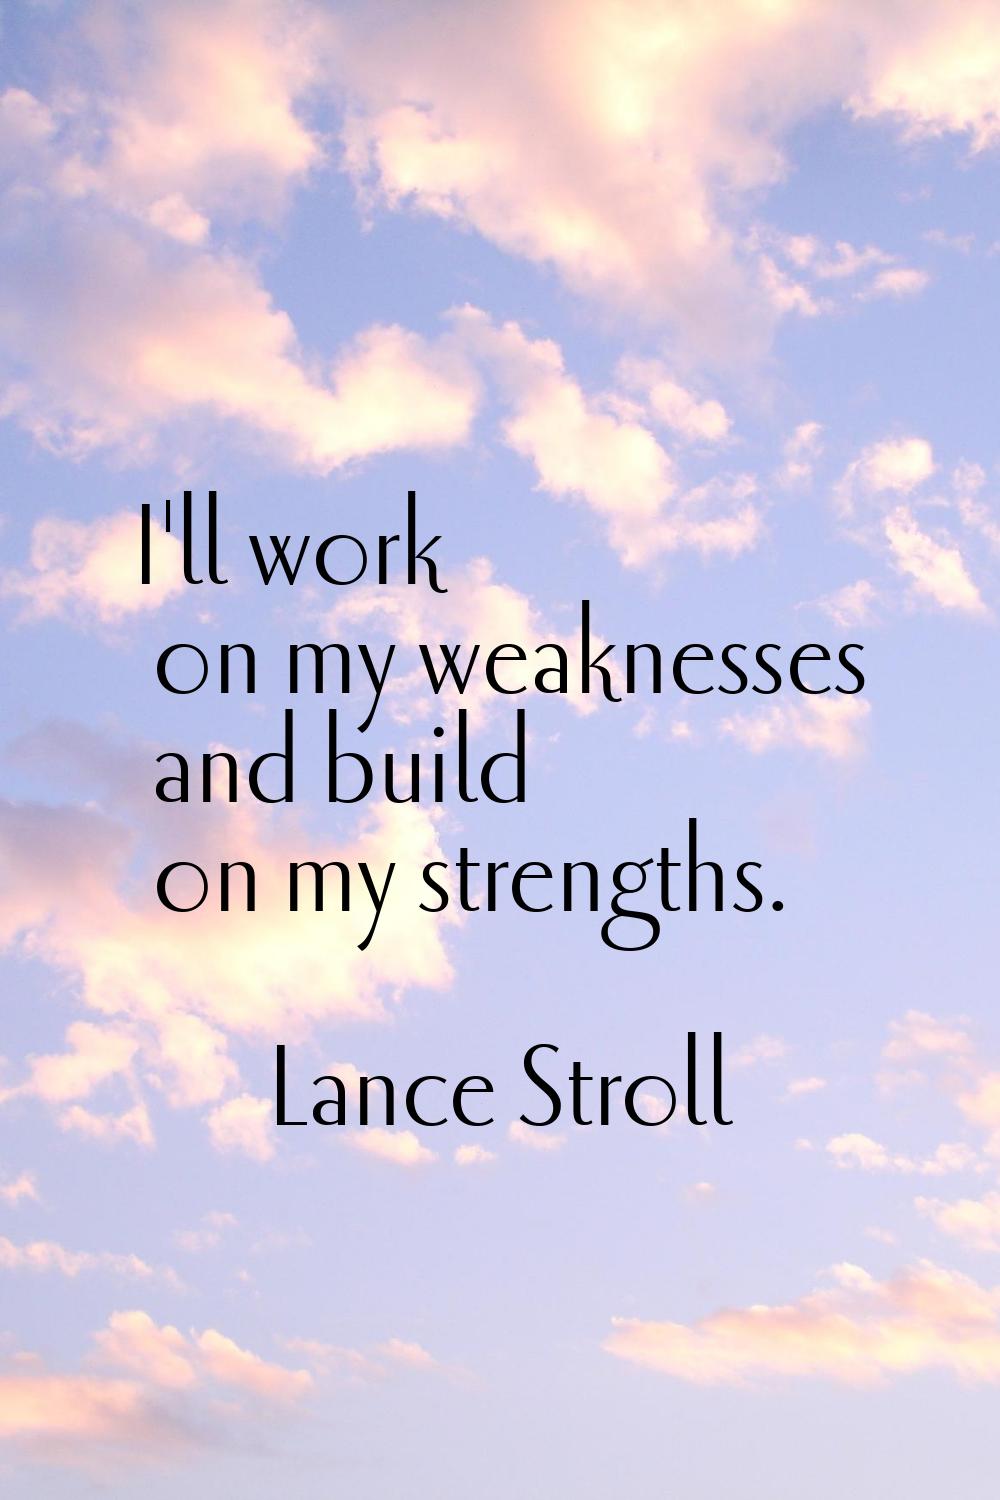 I'll work on my weaknesses and build on my strengths.